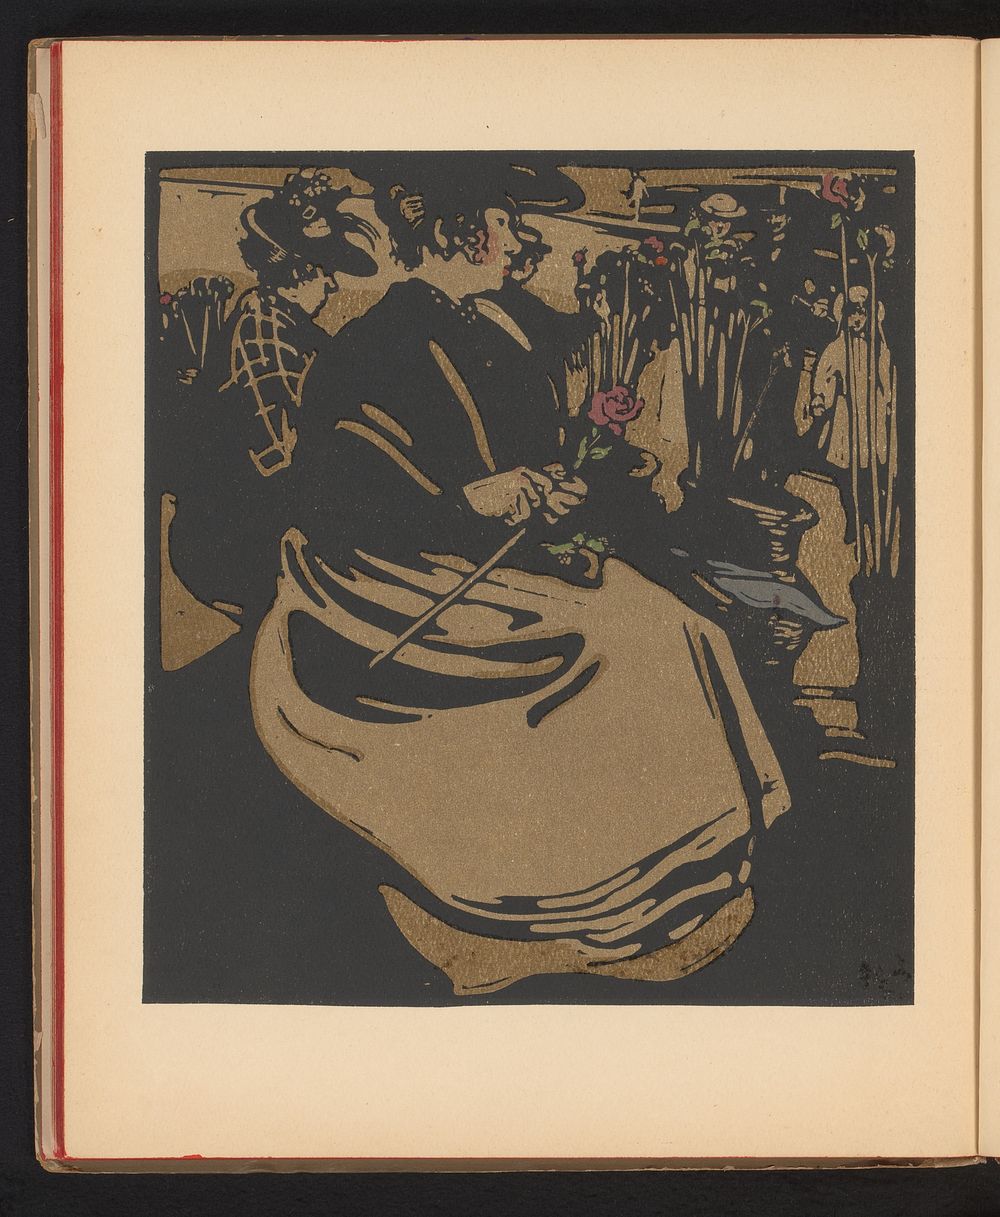 Vrouw met roos (1898) by William Nicholson and William Ernest Henley